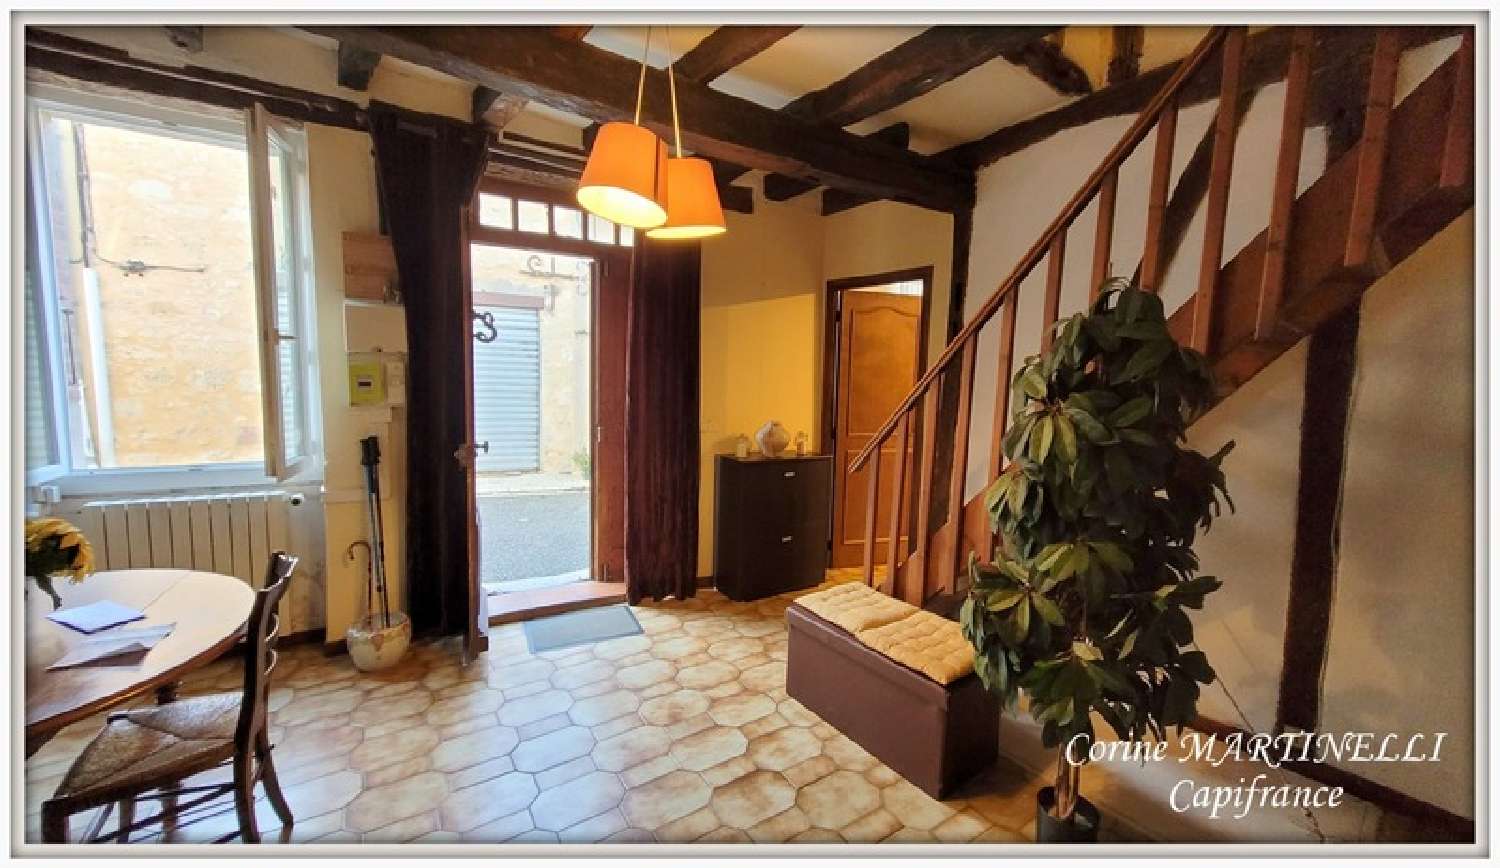  for sale village house Lectoure Gers 8